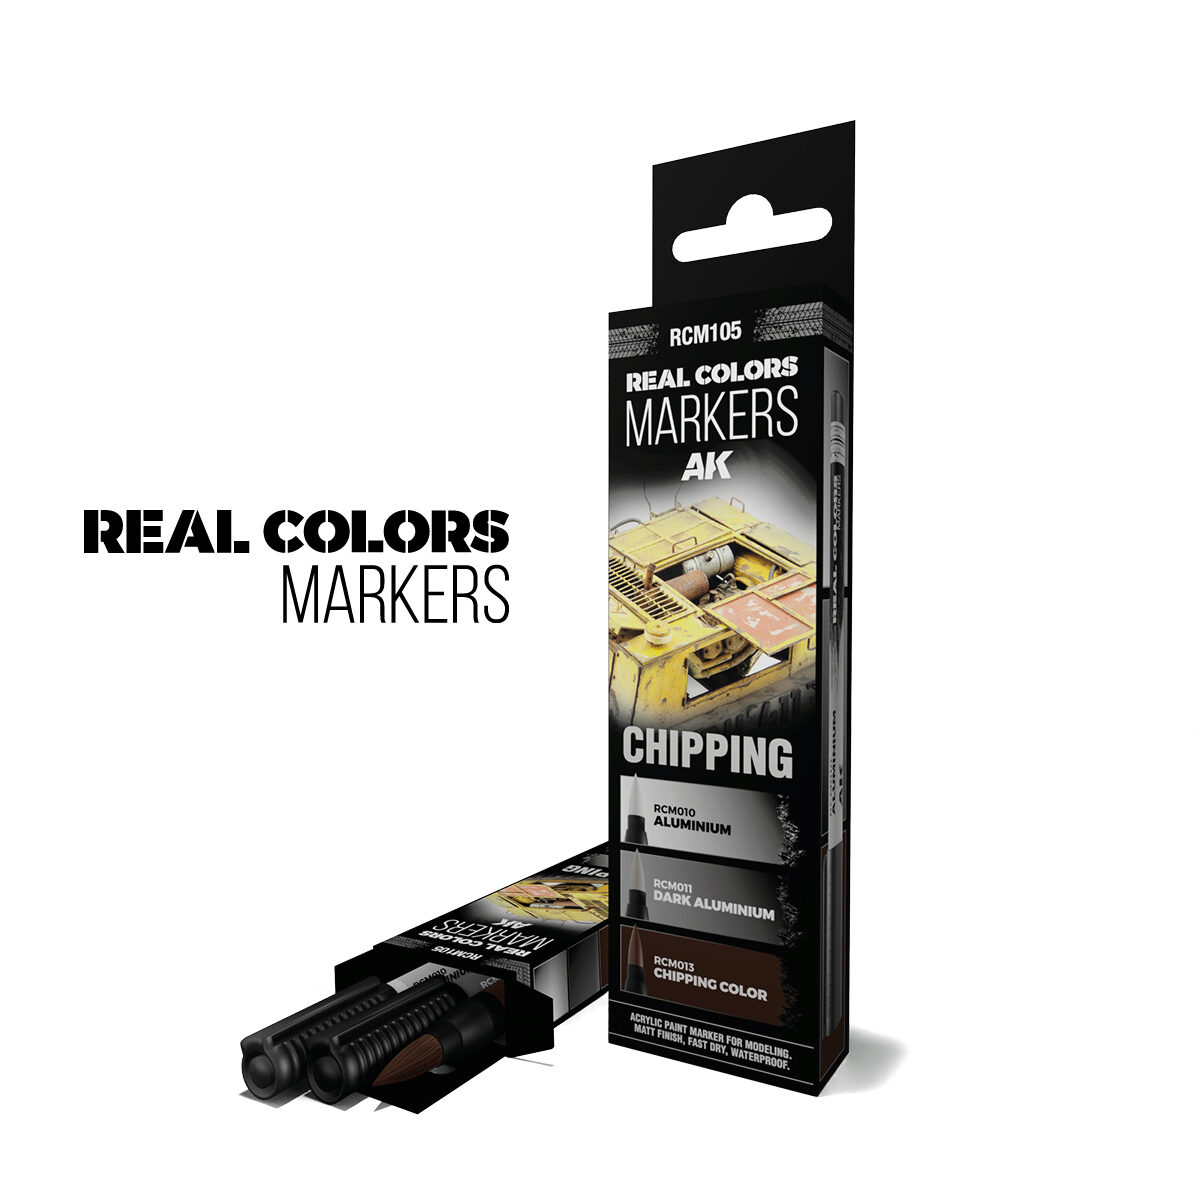 AK RCM105 CHIPPING - SET 3 REAL COLORS MARKERS